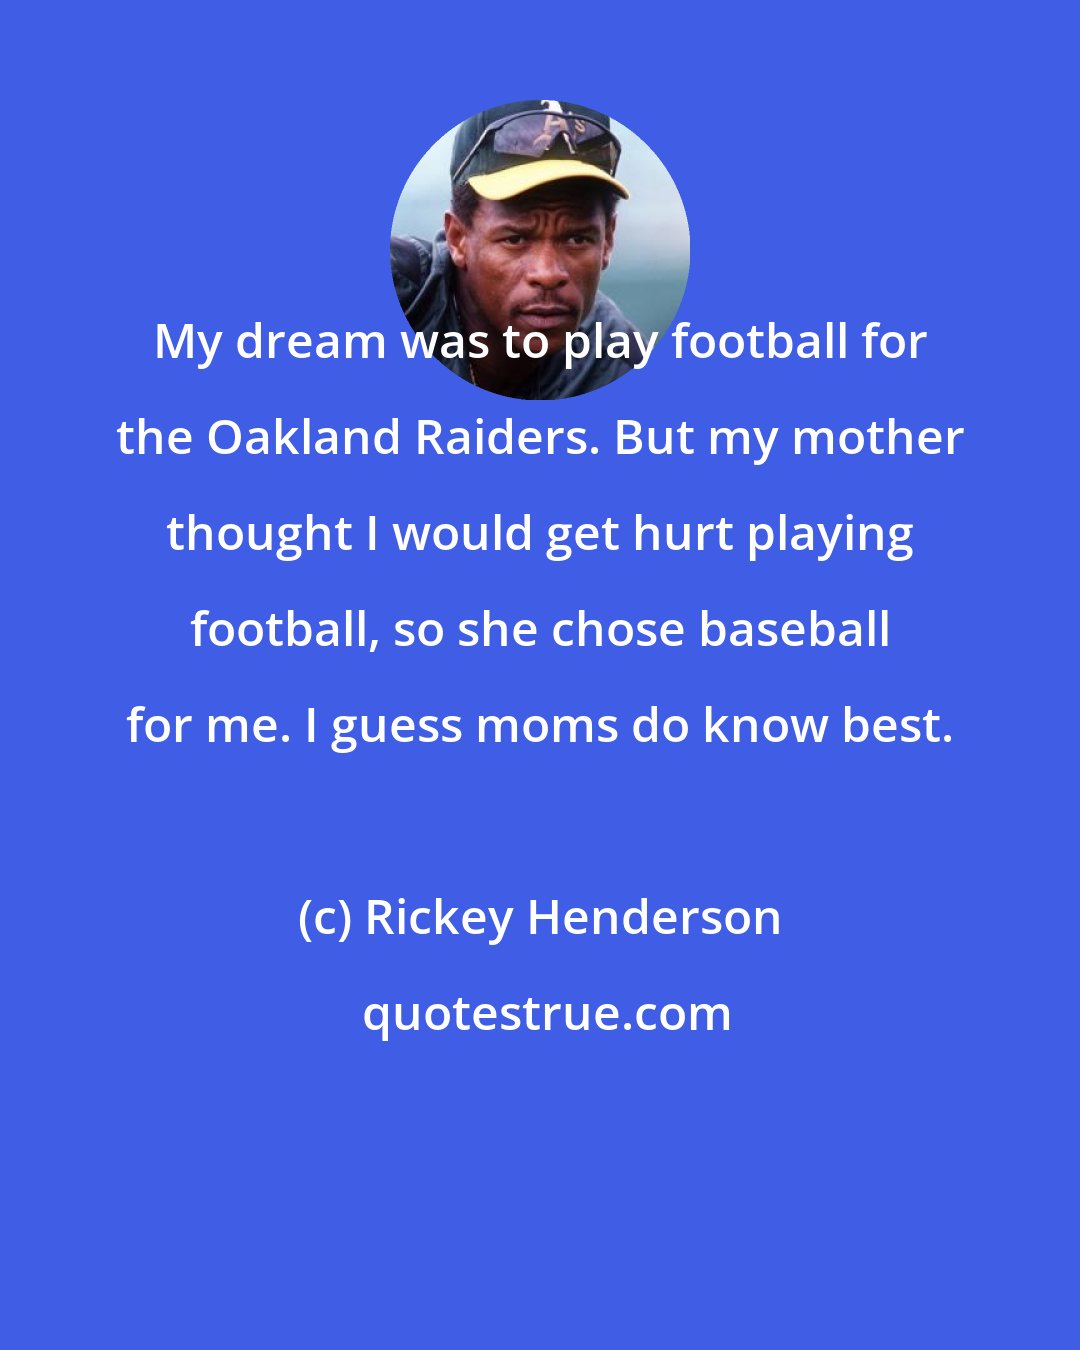 Rickey Henderson: My dream was to play football for the Oakland Raiders. But my mother thought I would get hurt playing football, so she chose baseball for me. I guess moms do know best.